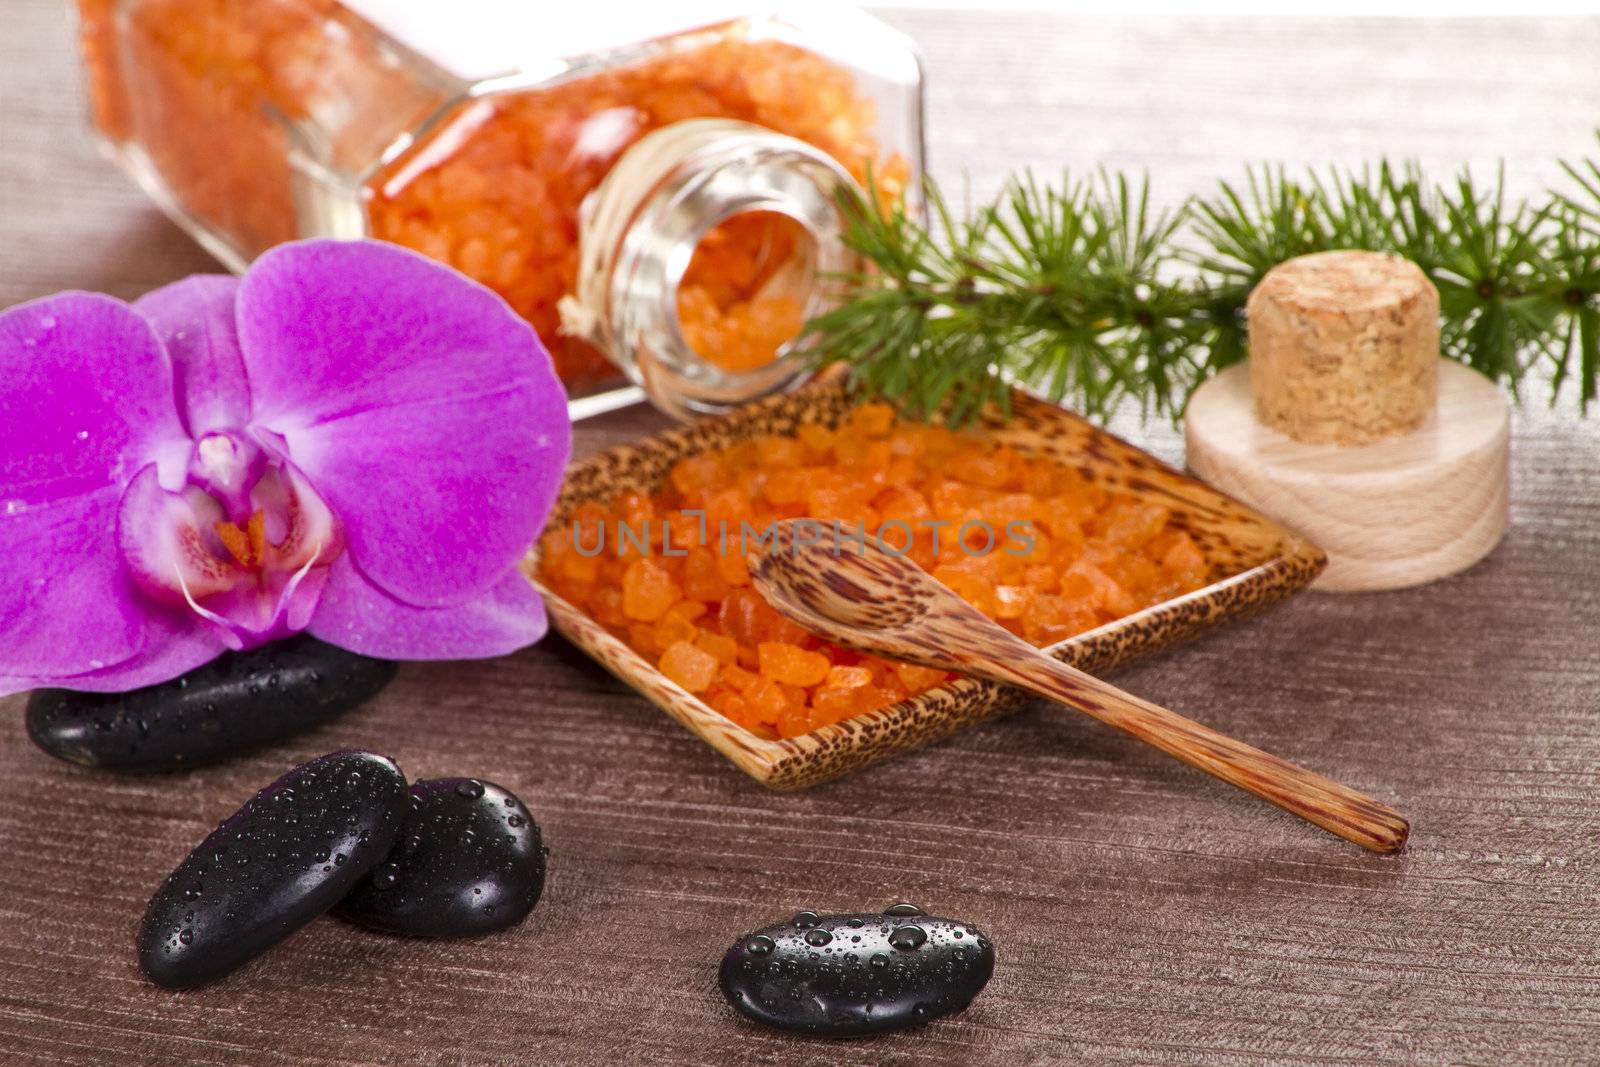 Spa Concept - Zen Stones With Pink Orchid and Relaxing Salt